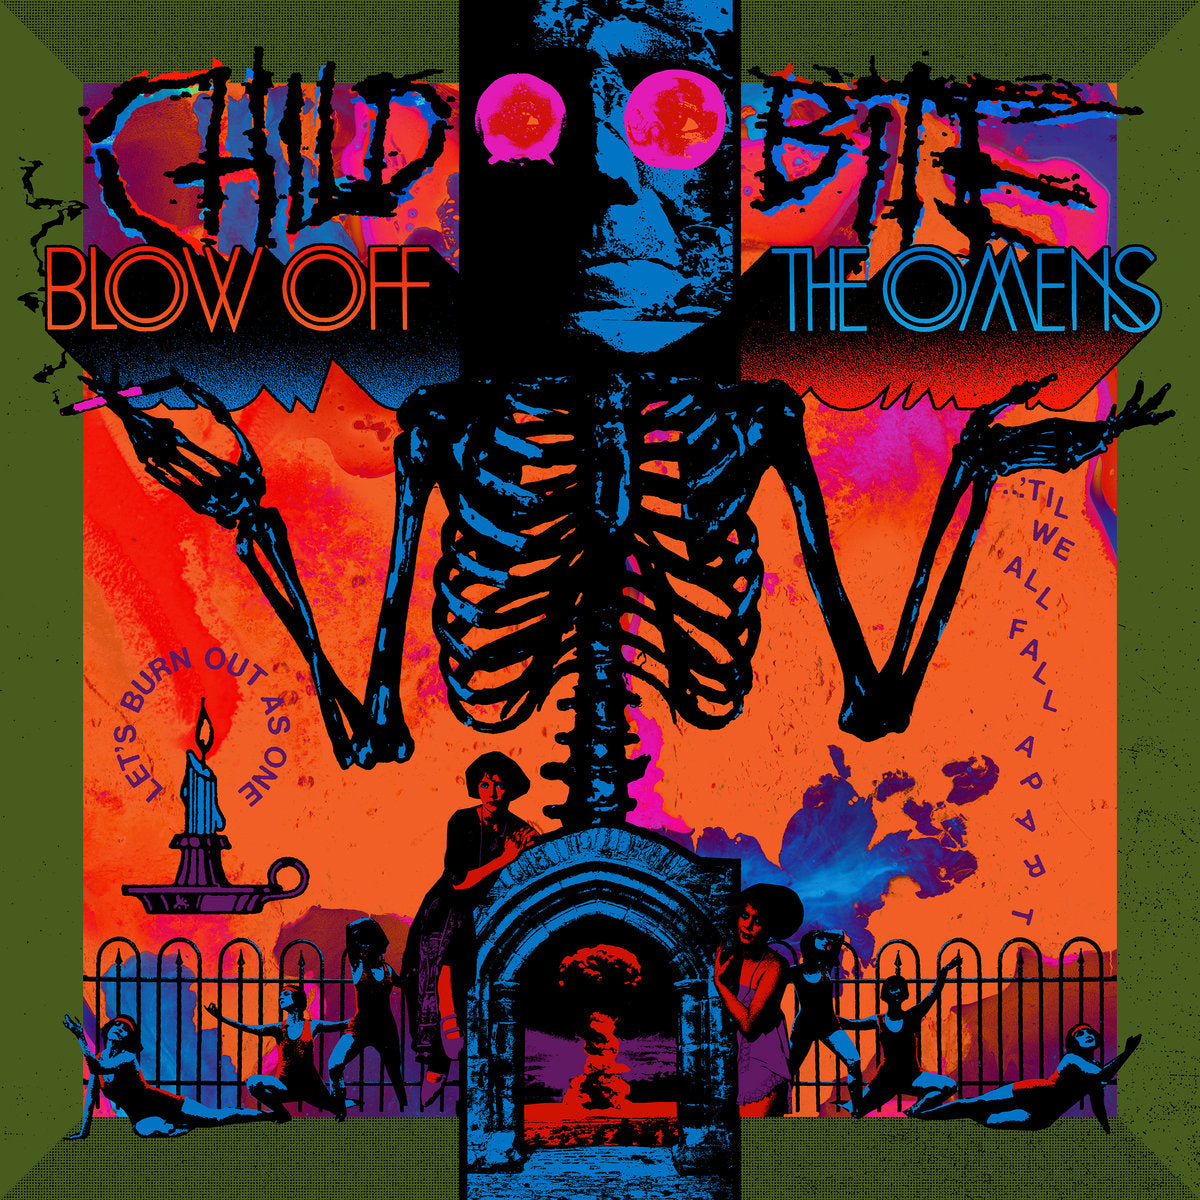 Child Bite - Blow Off the Omens